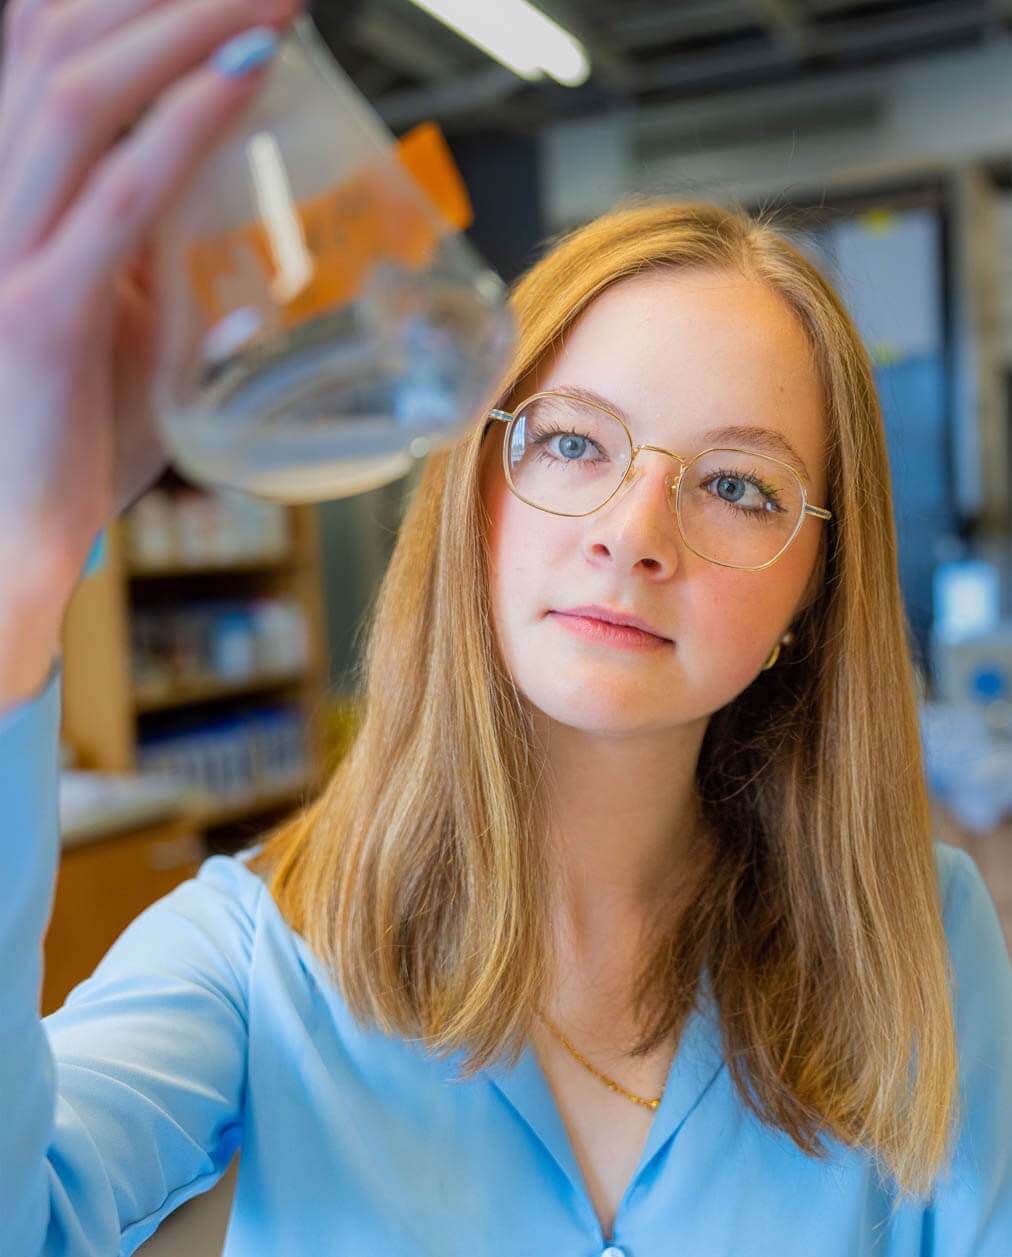 A photo of a person holding a beaker in a lab